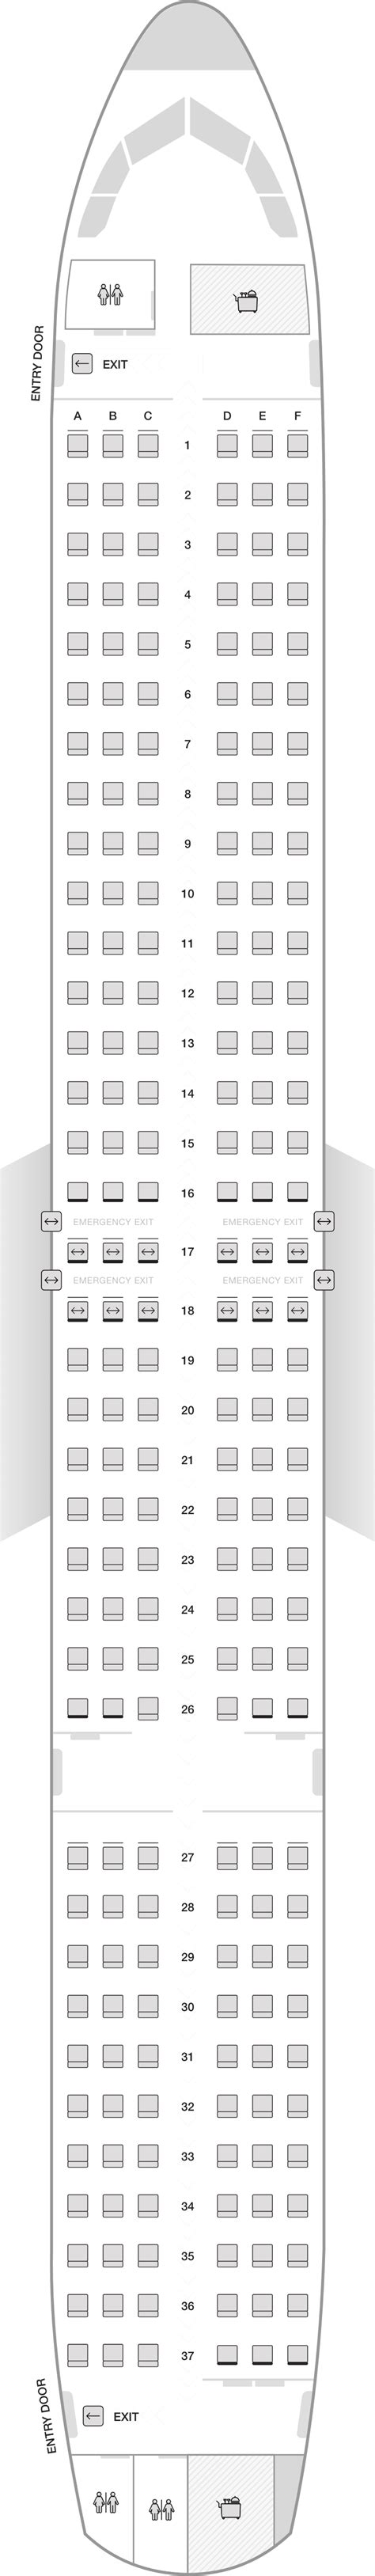 Airbus A321 Neo Seating Map